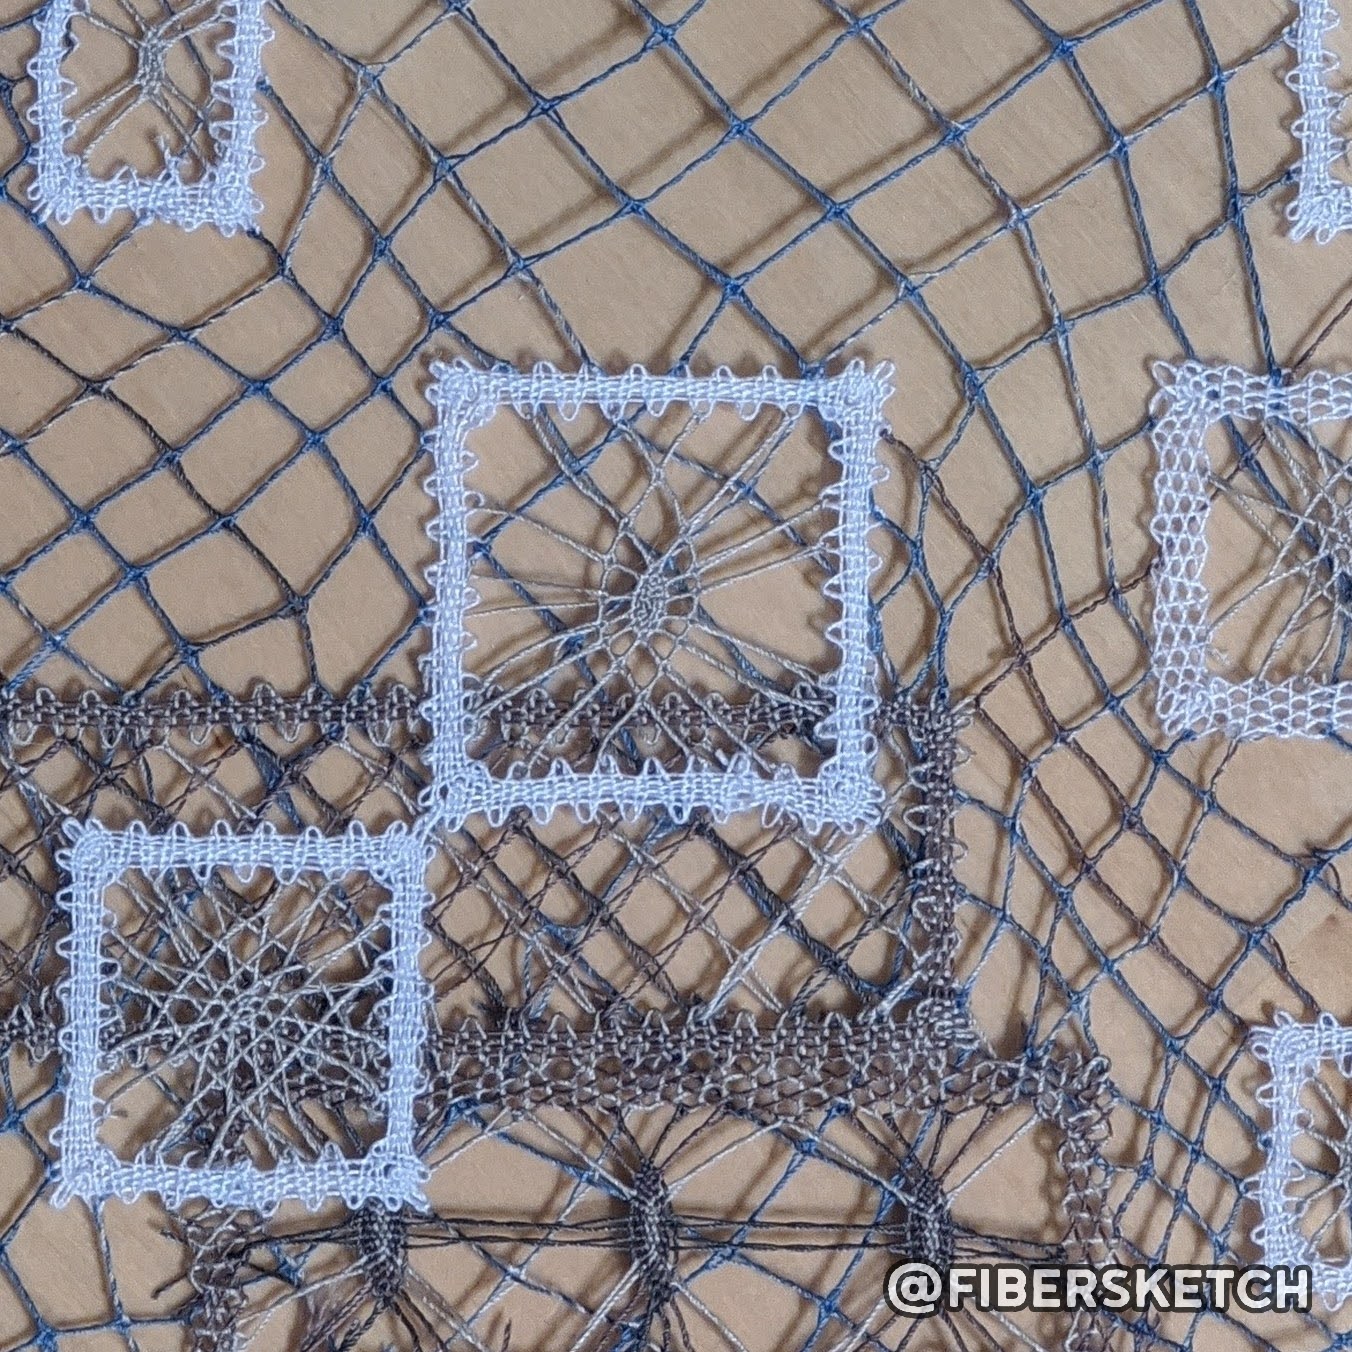 Bobbin Lace Art - 'Upper Respiratory Tract Infection, Unspecified Type', July 2020 - Detail Image